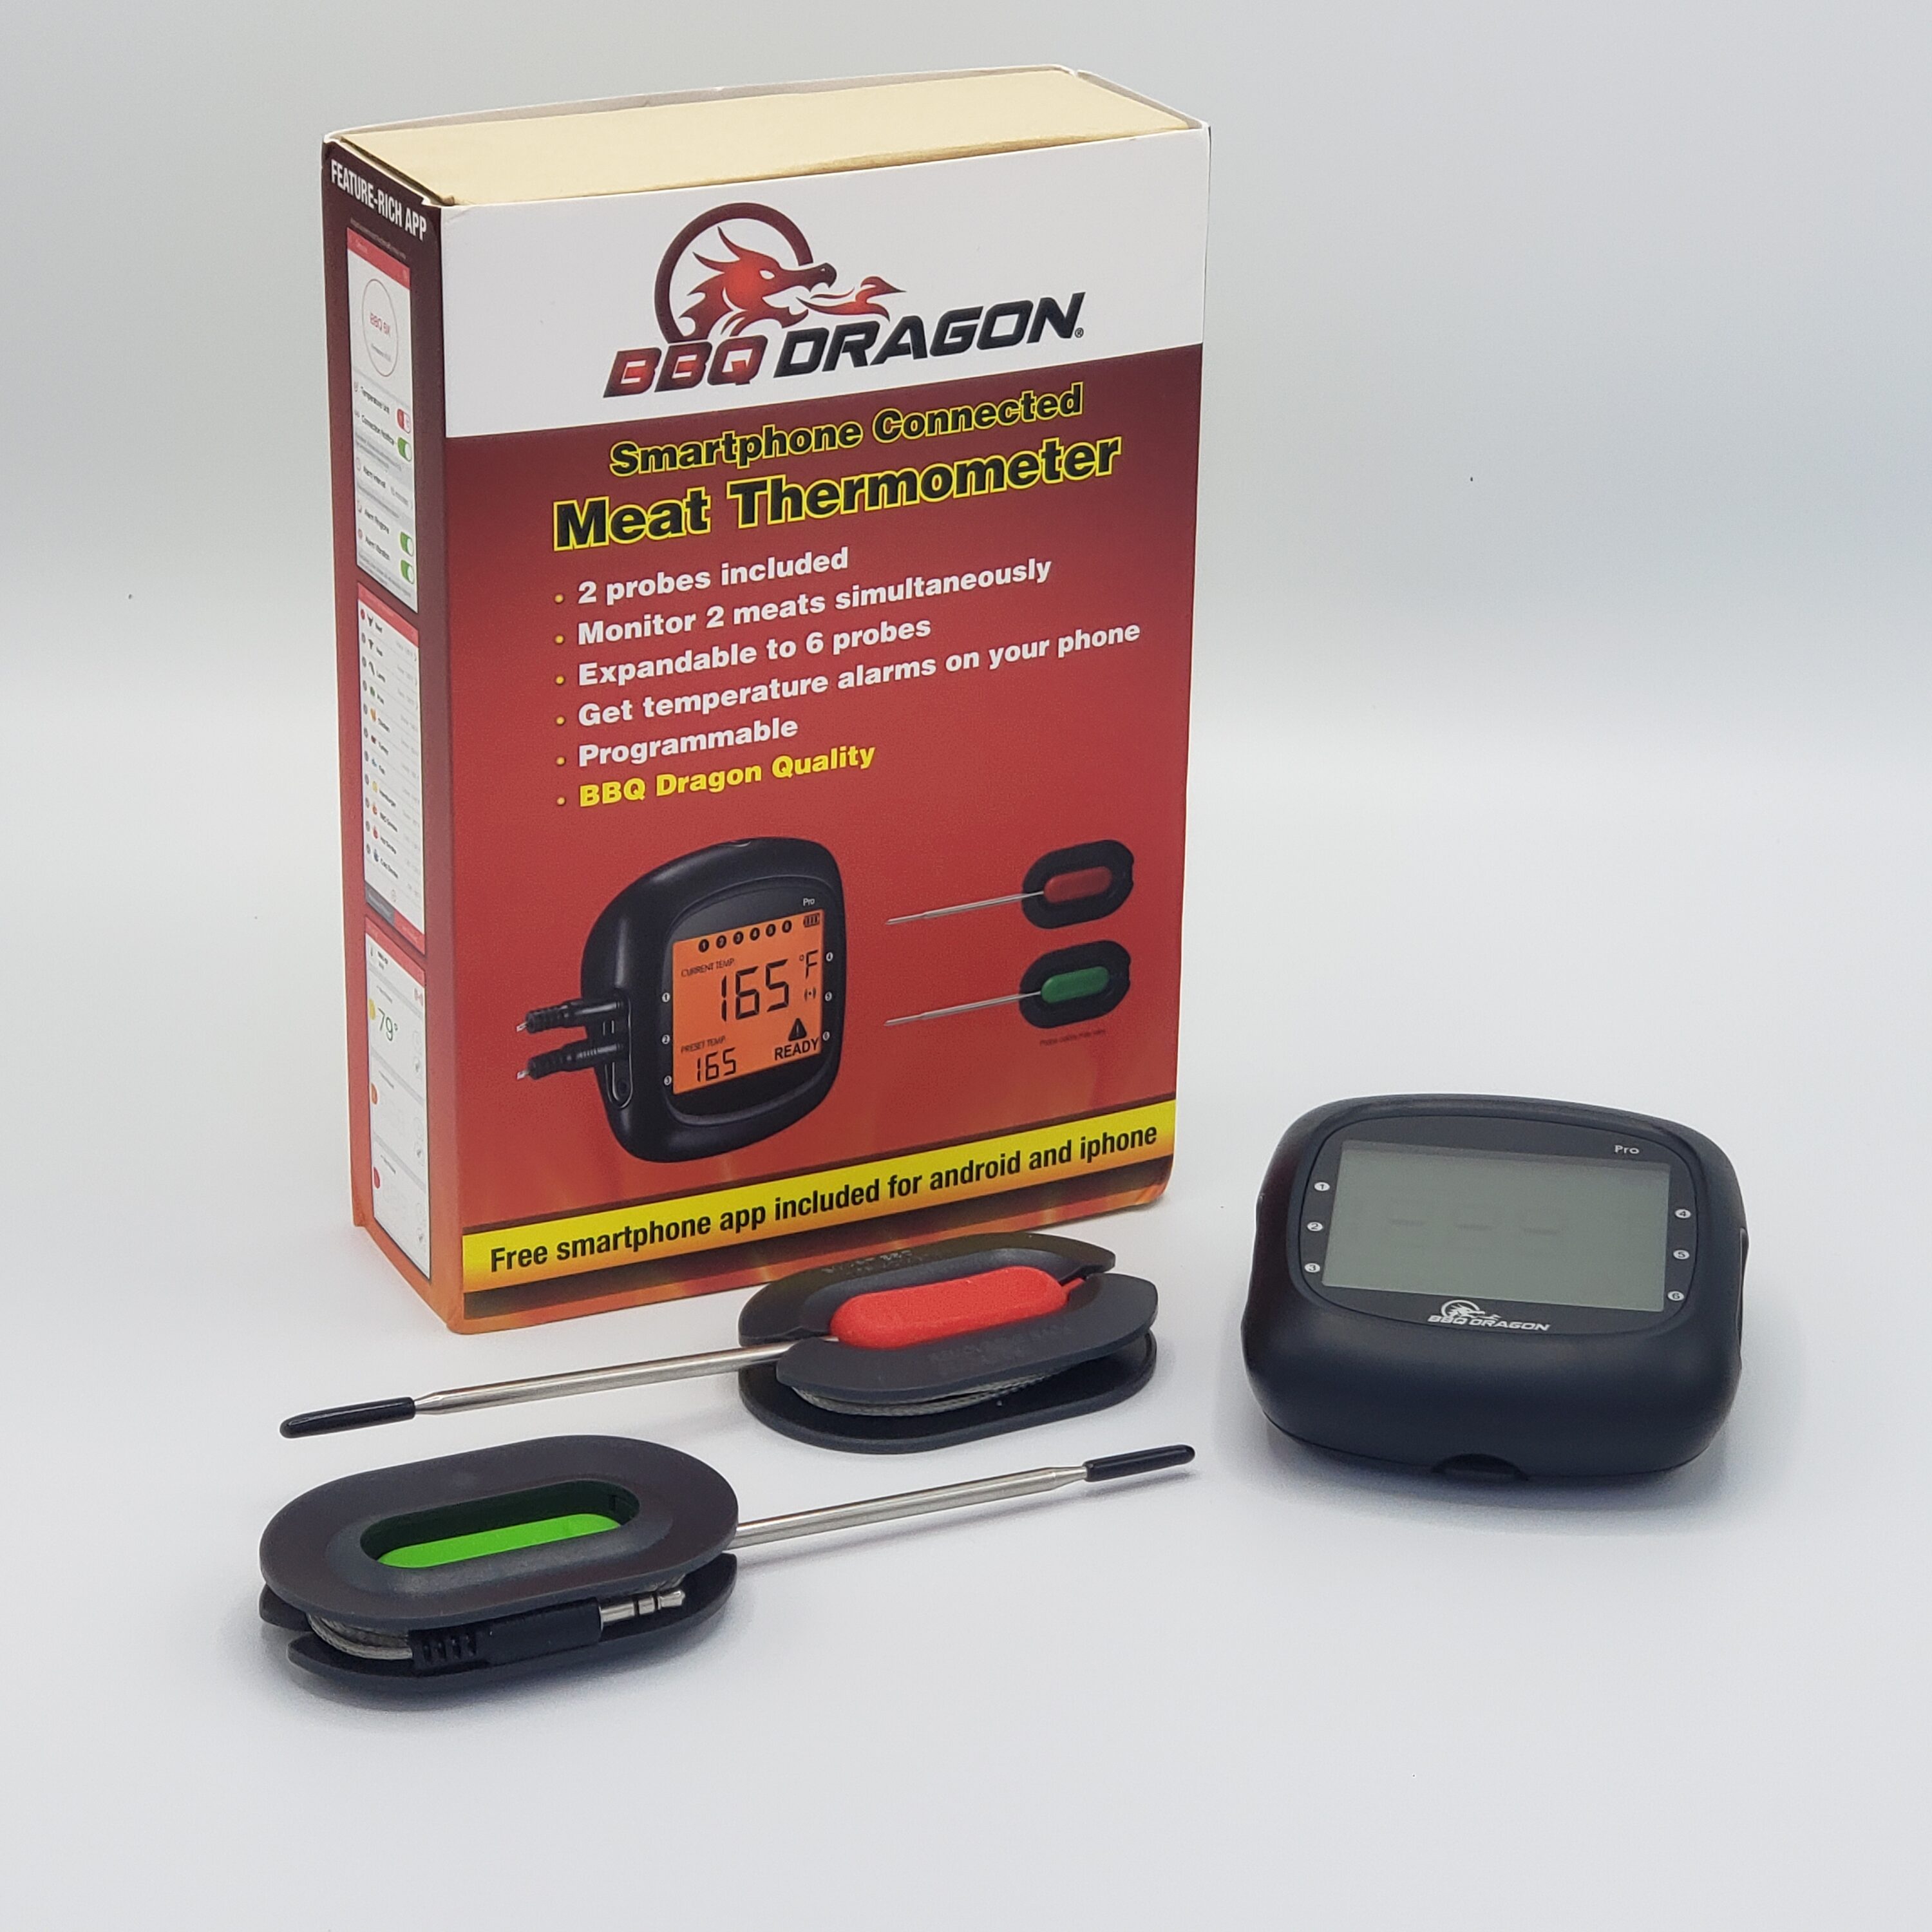 Zoo Med Digital Thermometer